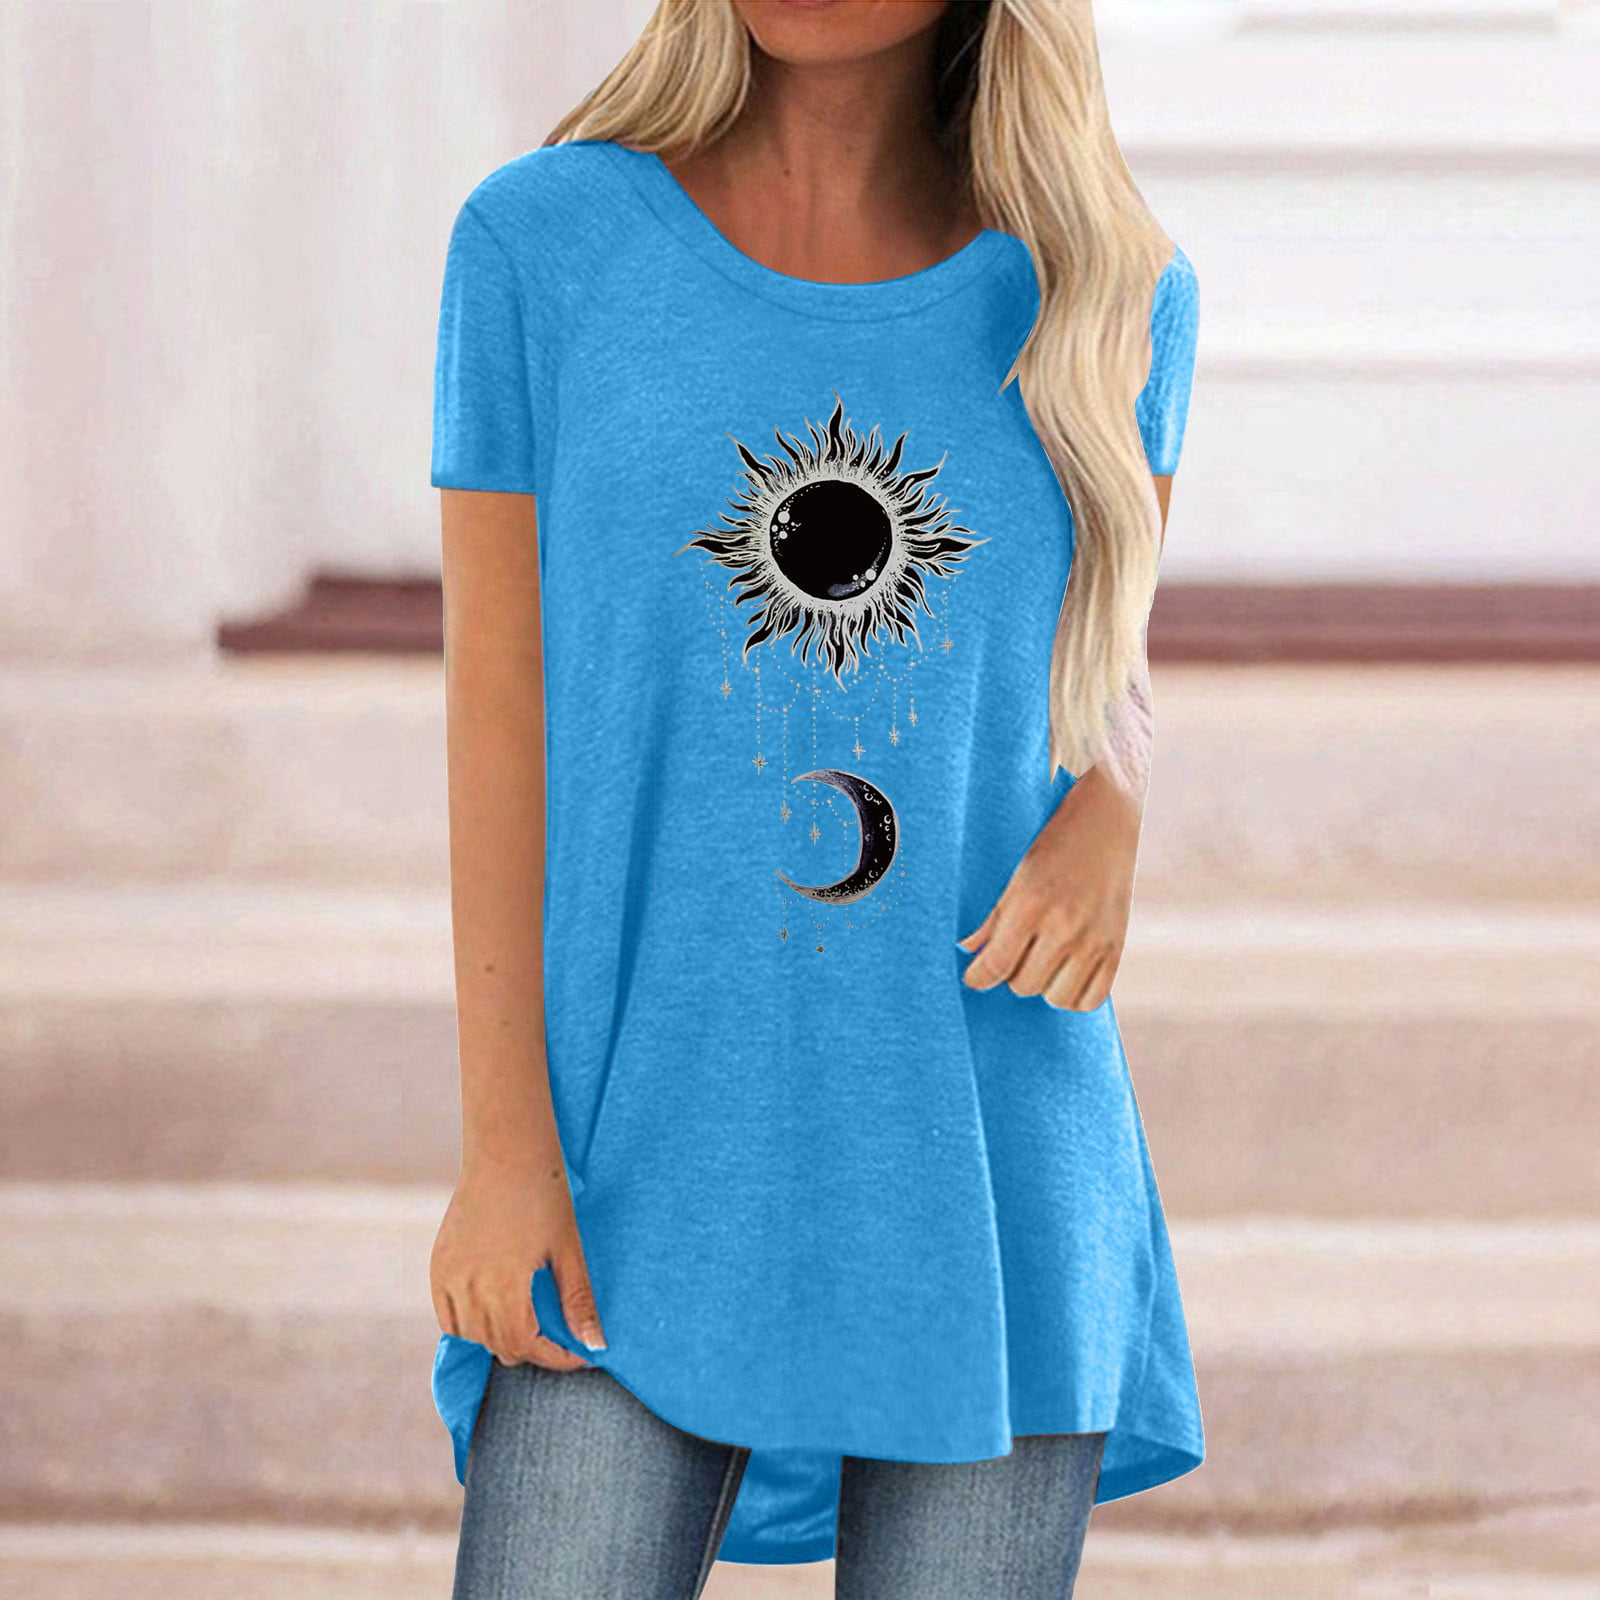 Plus Size Tshirts for Women, Summer Tunic Tops for to Wear with Leggings Short Sleeve V Neck Shirts Casual Loose Fit T-shirts long tunics for women to wear with